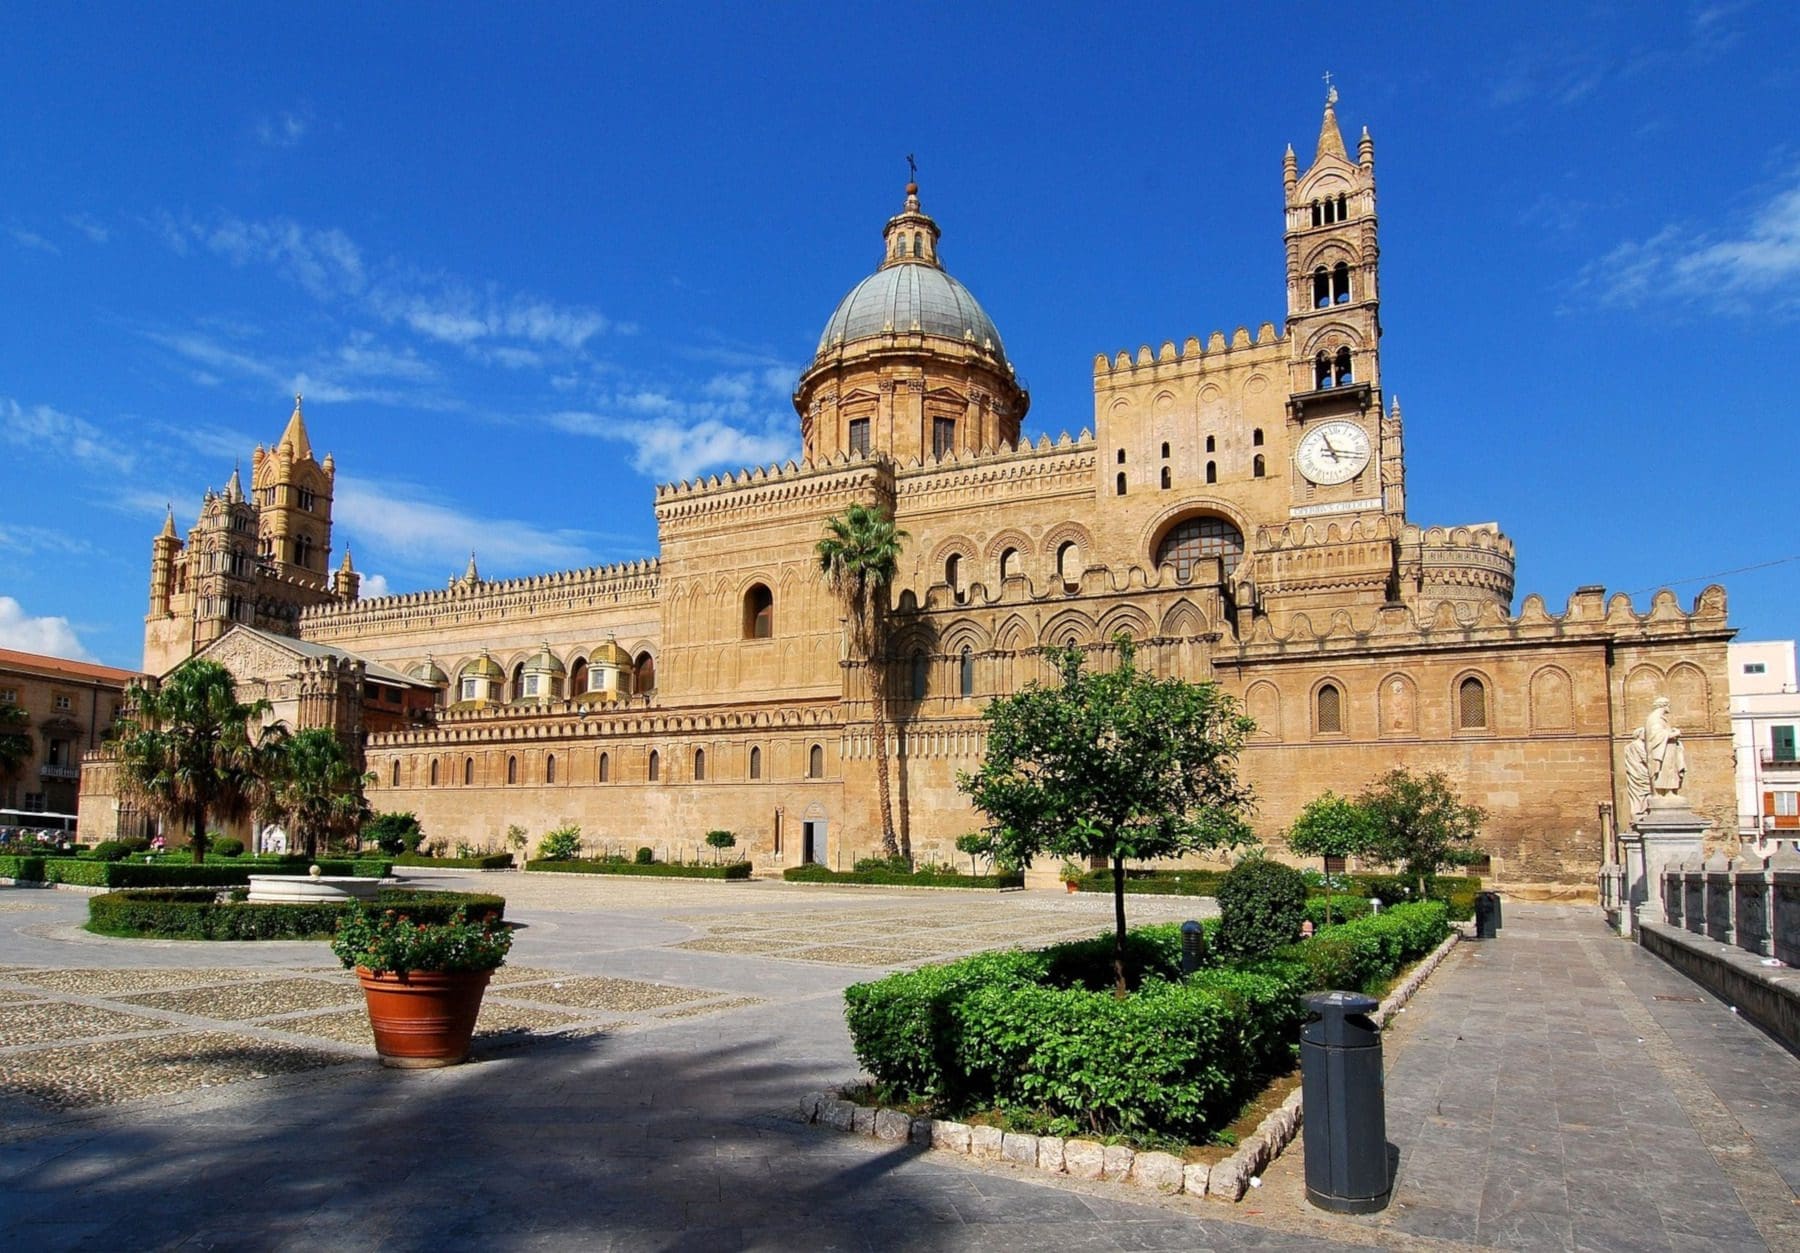 Palermo, Sicily Europe for Older Travellers